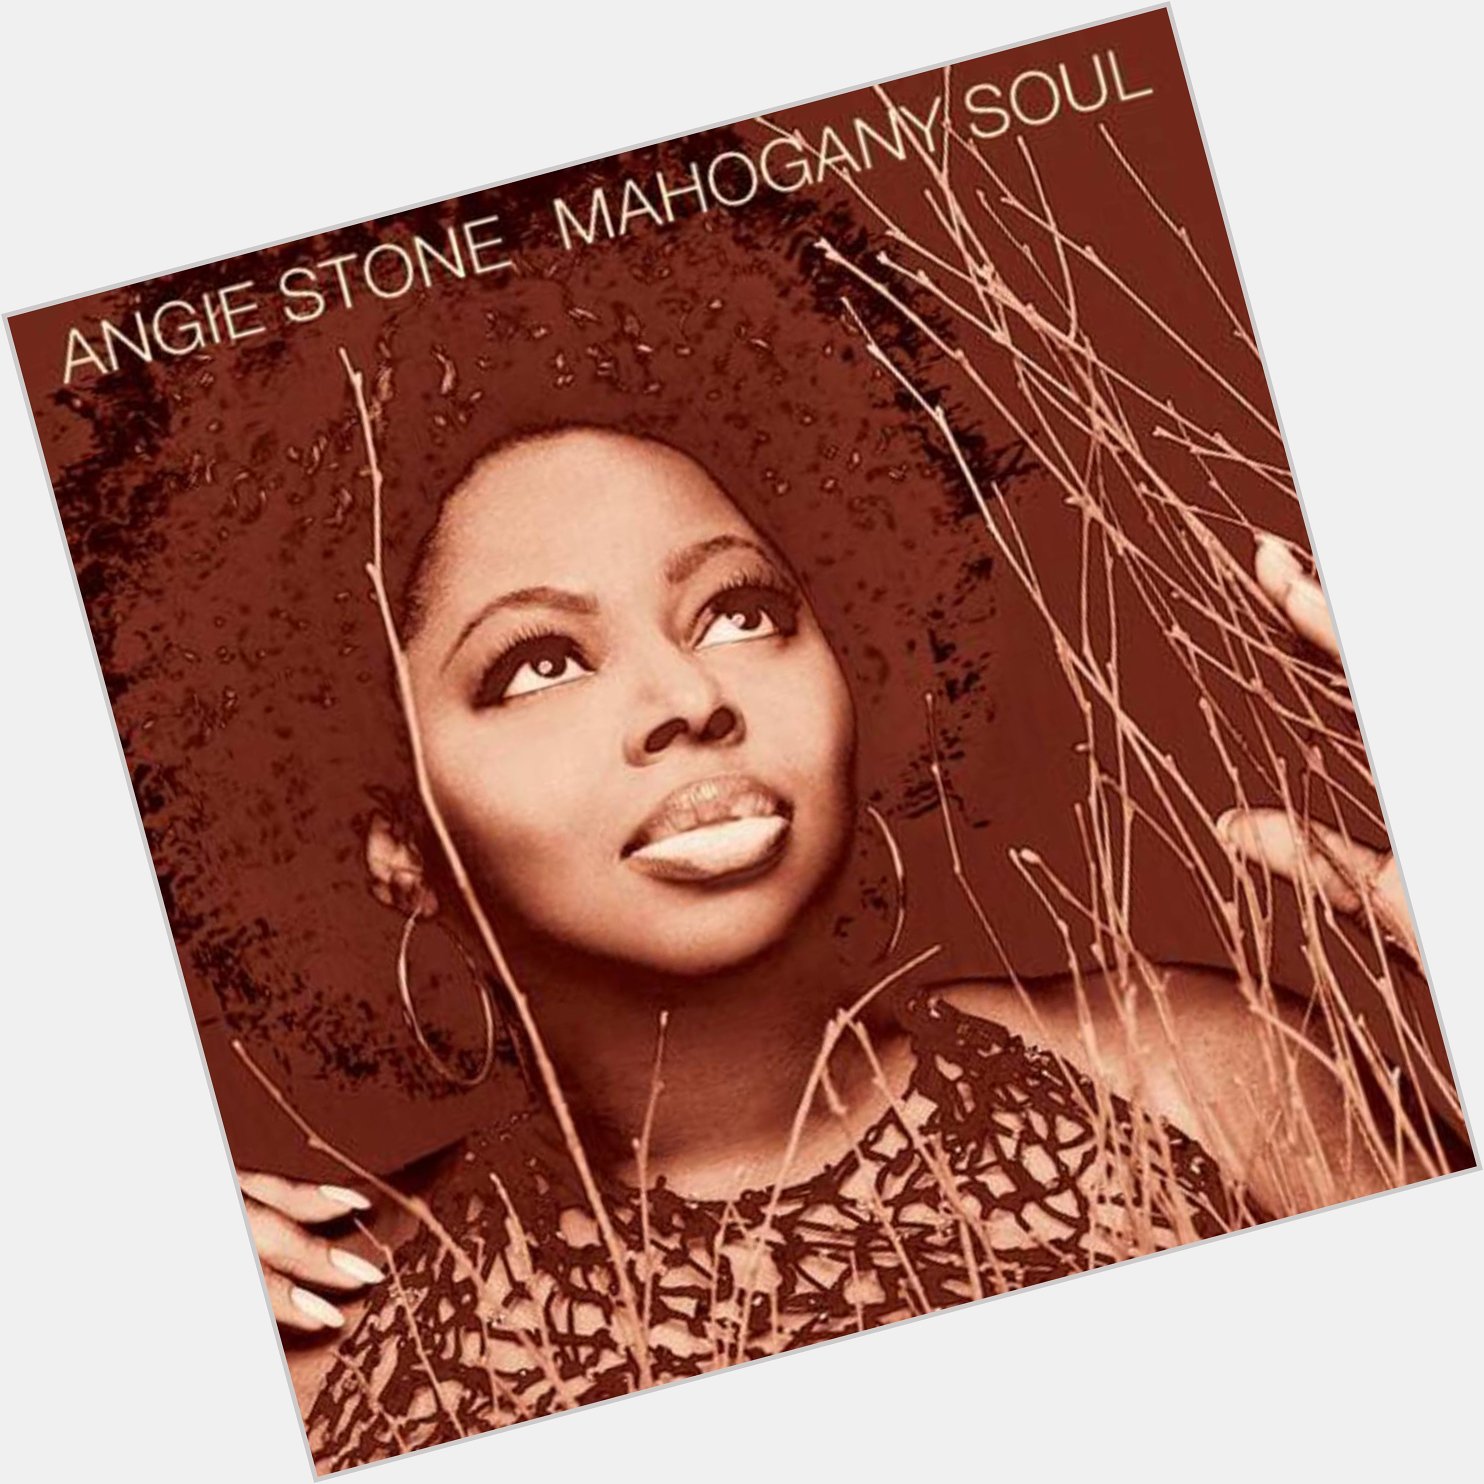 Play this album today. Happy 56th birthday to Angie Stone. 